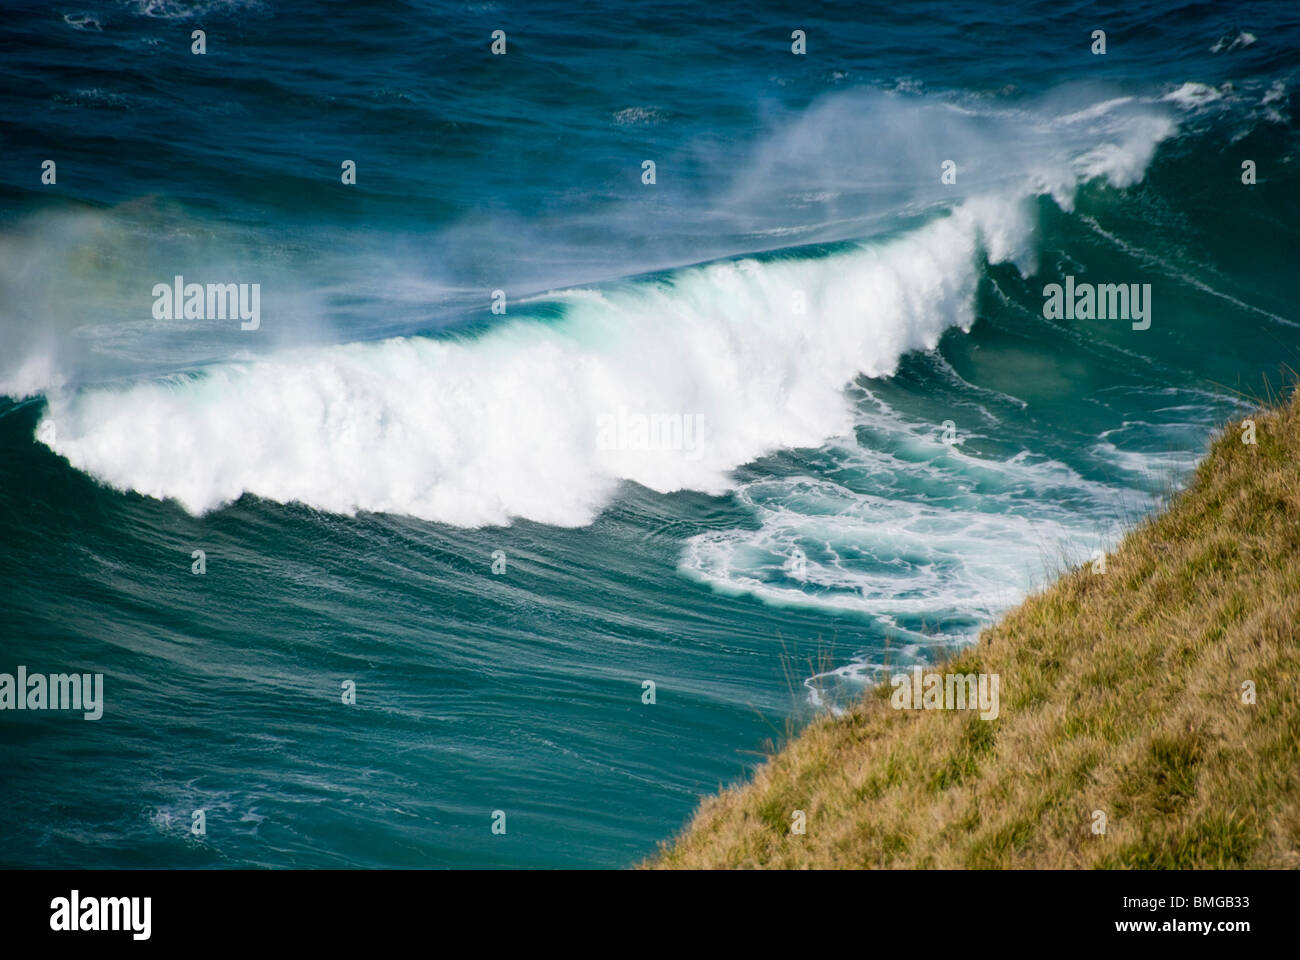 Waves about to crush on the Cliffs Stock Photo